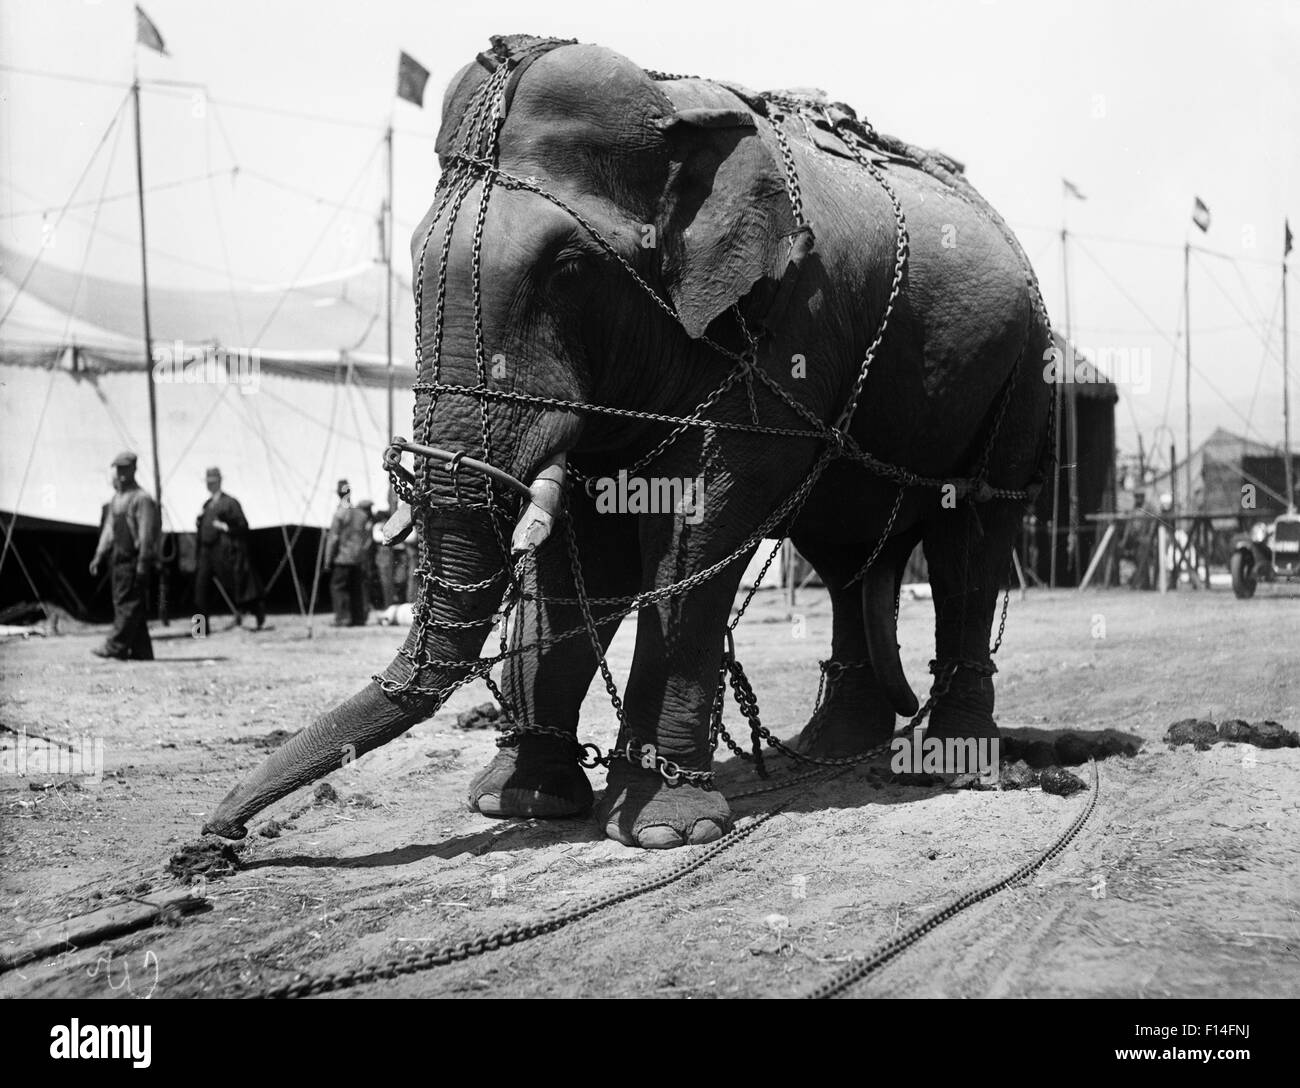 1930s CIRCUS ELEPHANT DRAPED IN CHAINS Stock Photo - Alamy